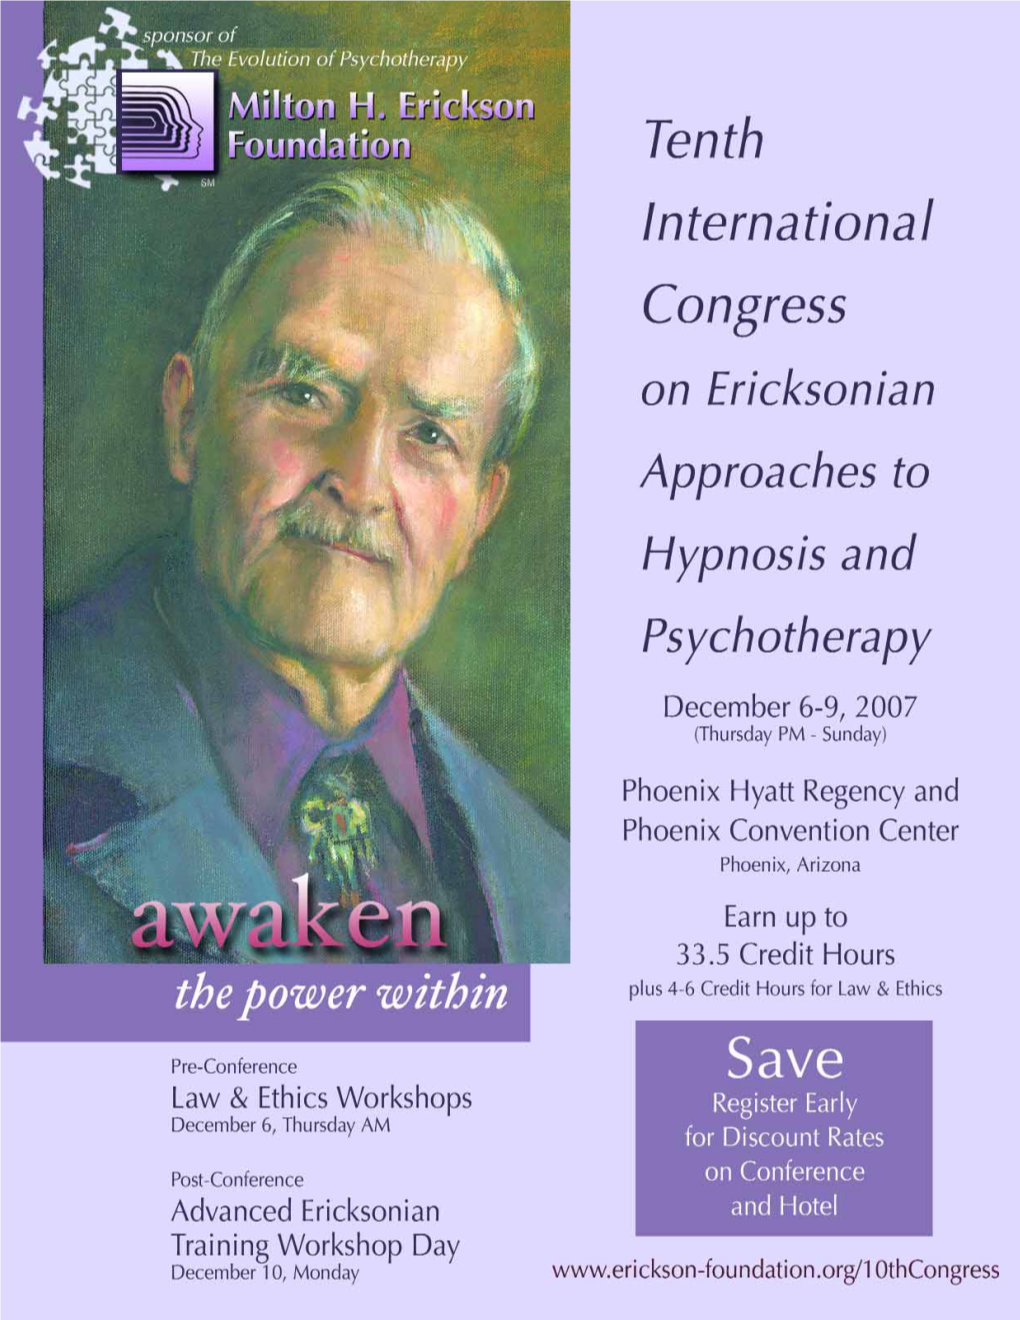 Tenth International Congress on Ericksonian Approaches to Hypnosis and Psychotherapy